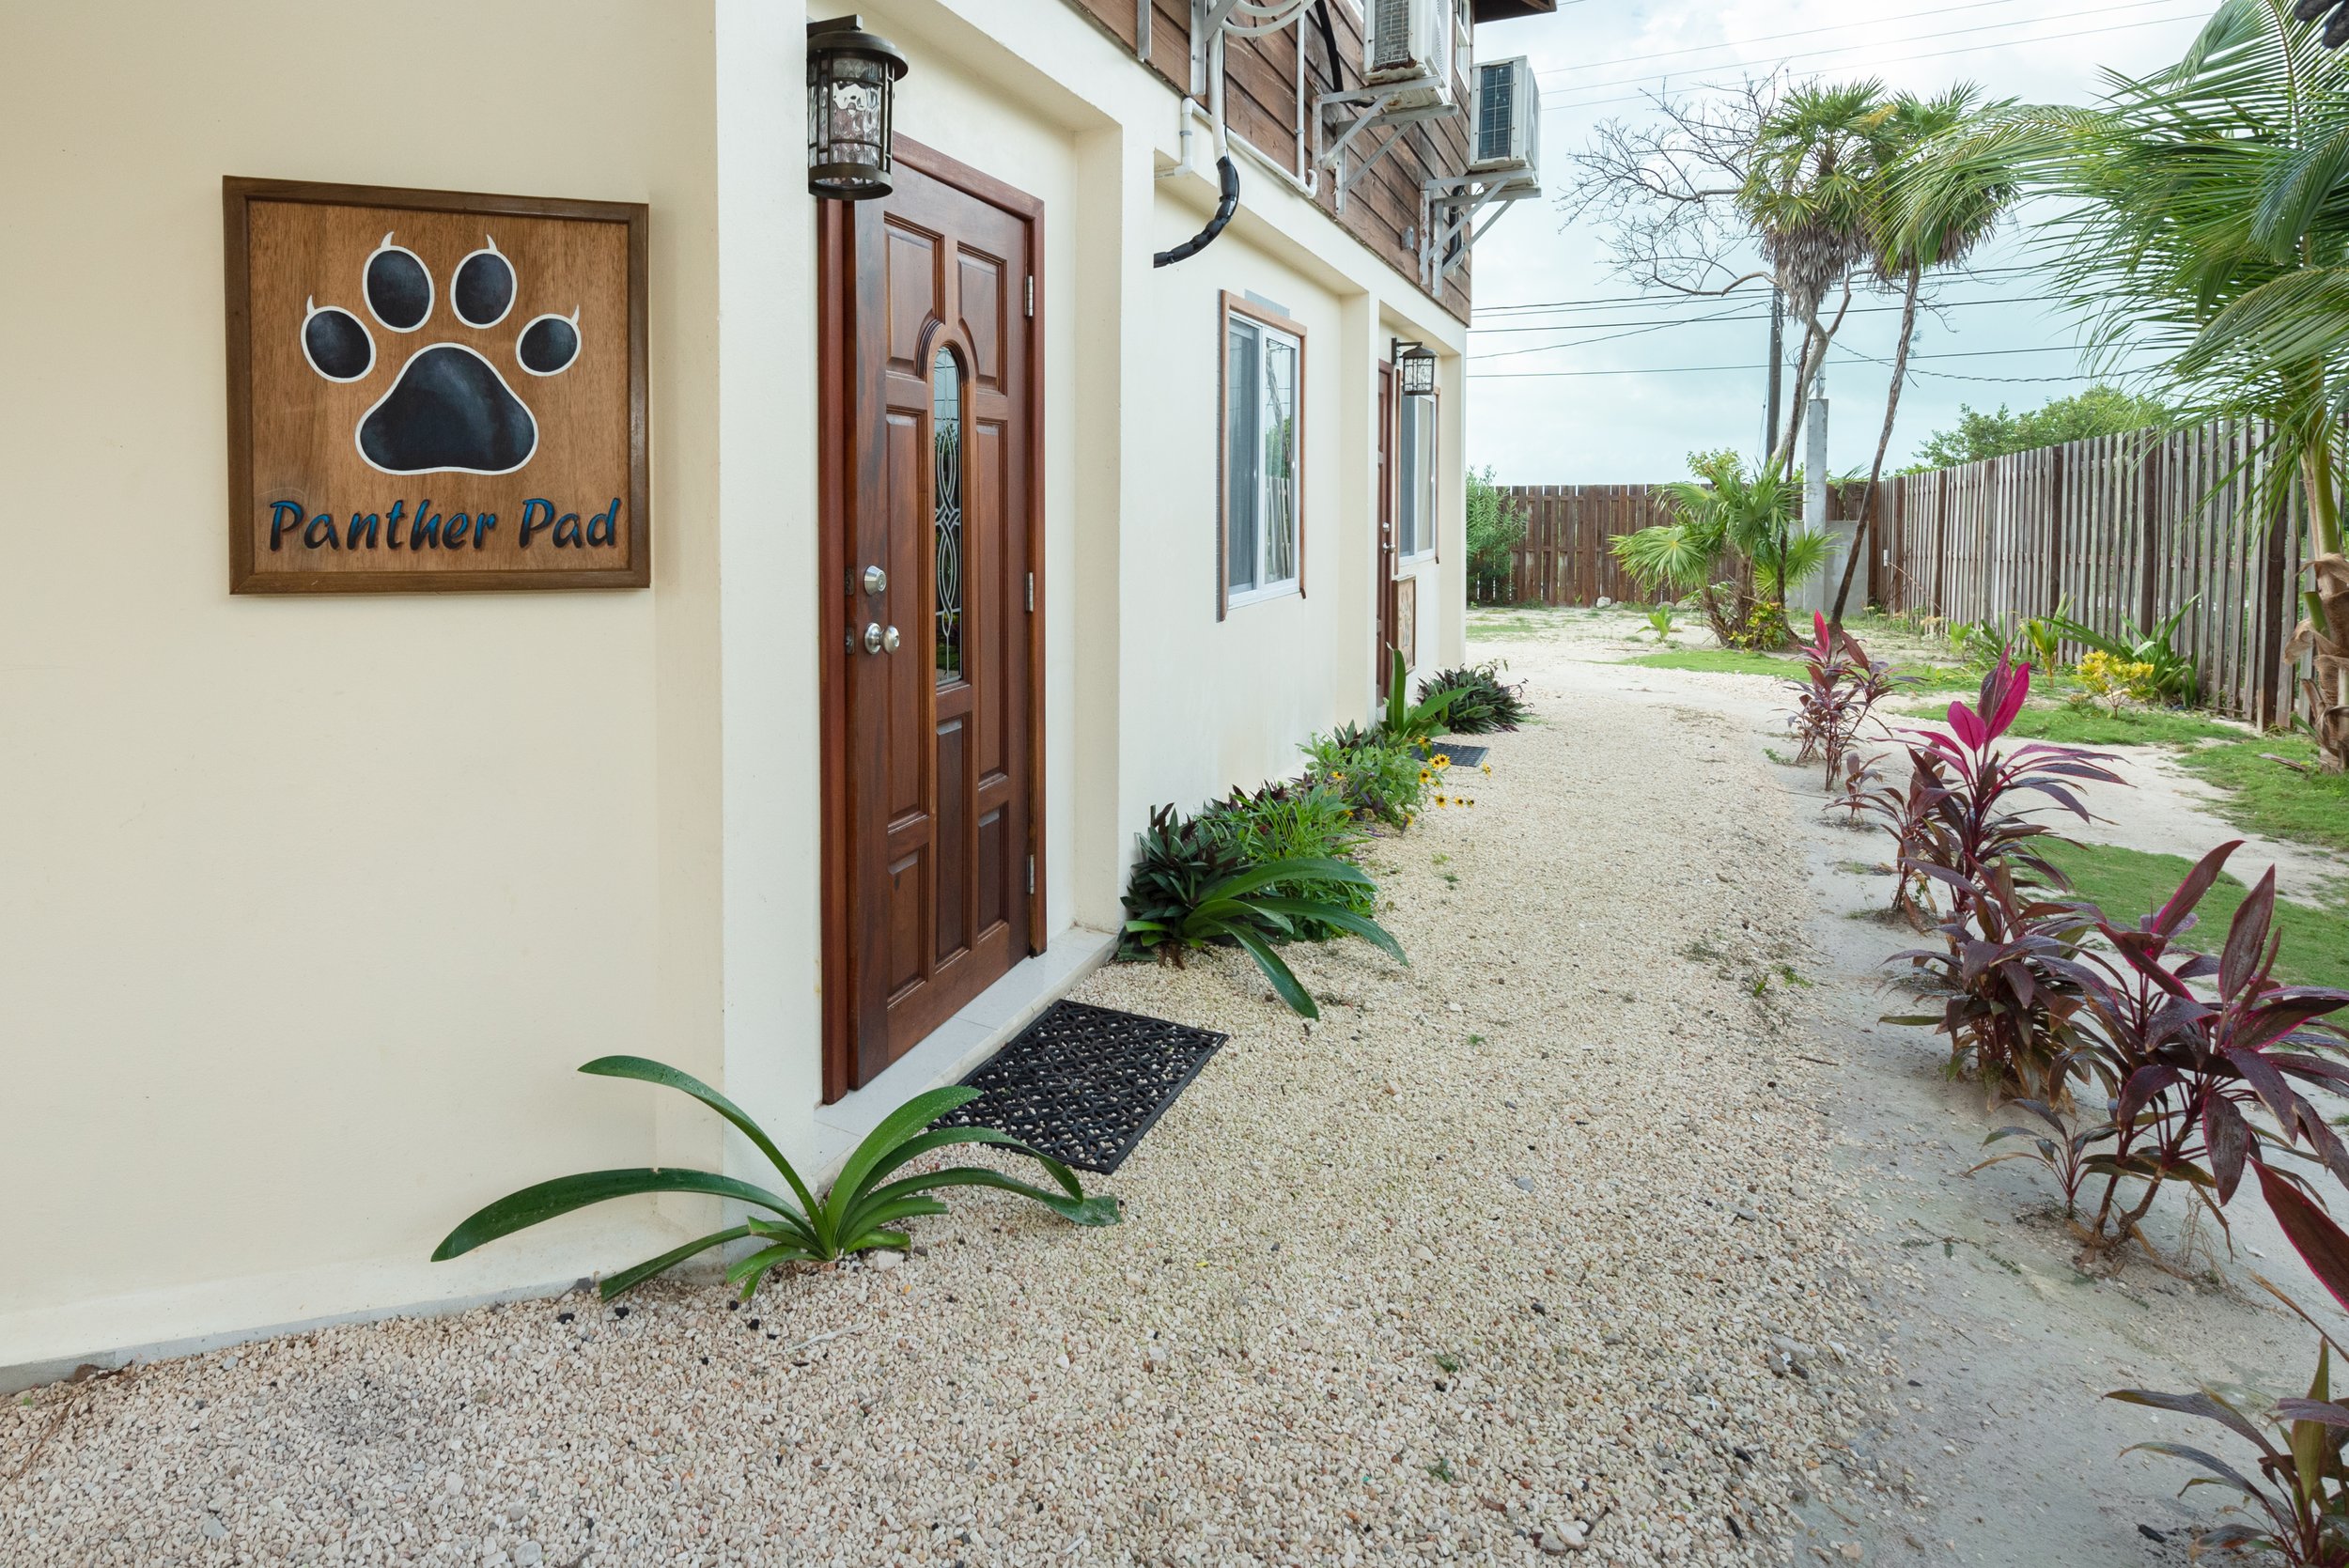 Panther Pad Unit at Pur Private House  in San Pedro Ambergris Caye Belize  Vacations.jpg